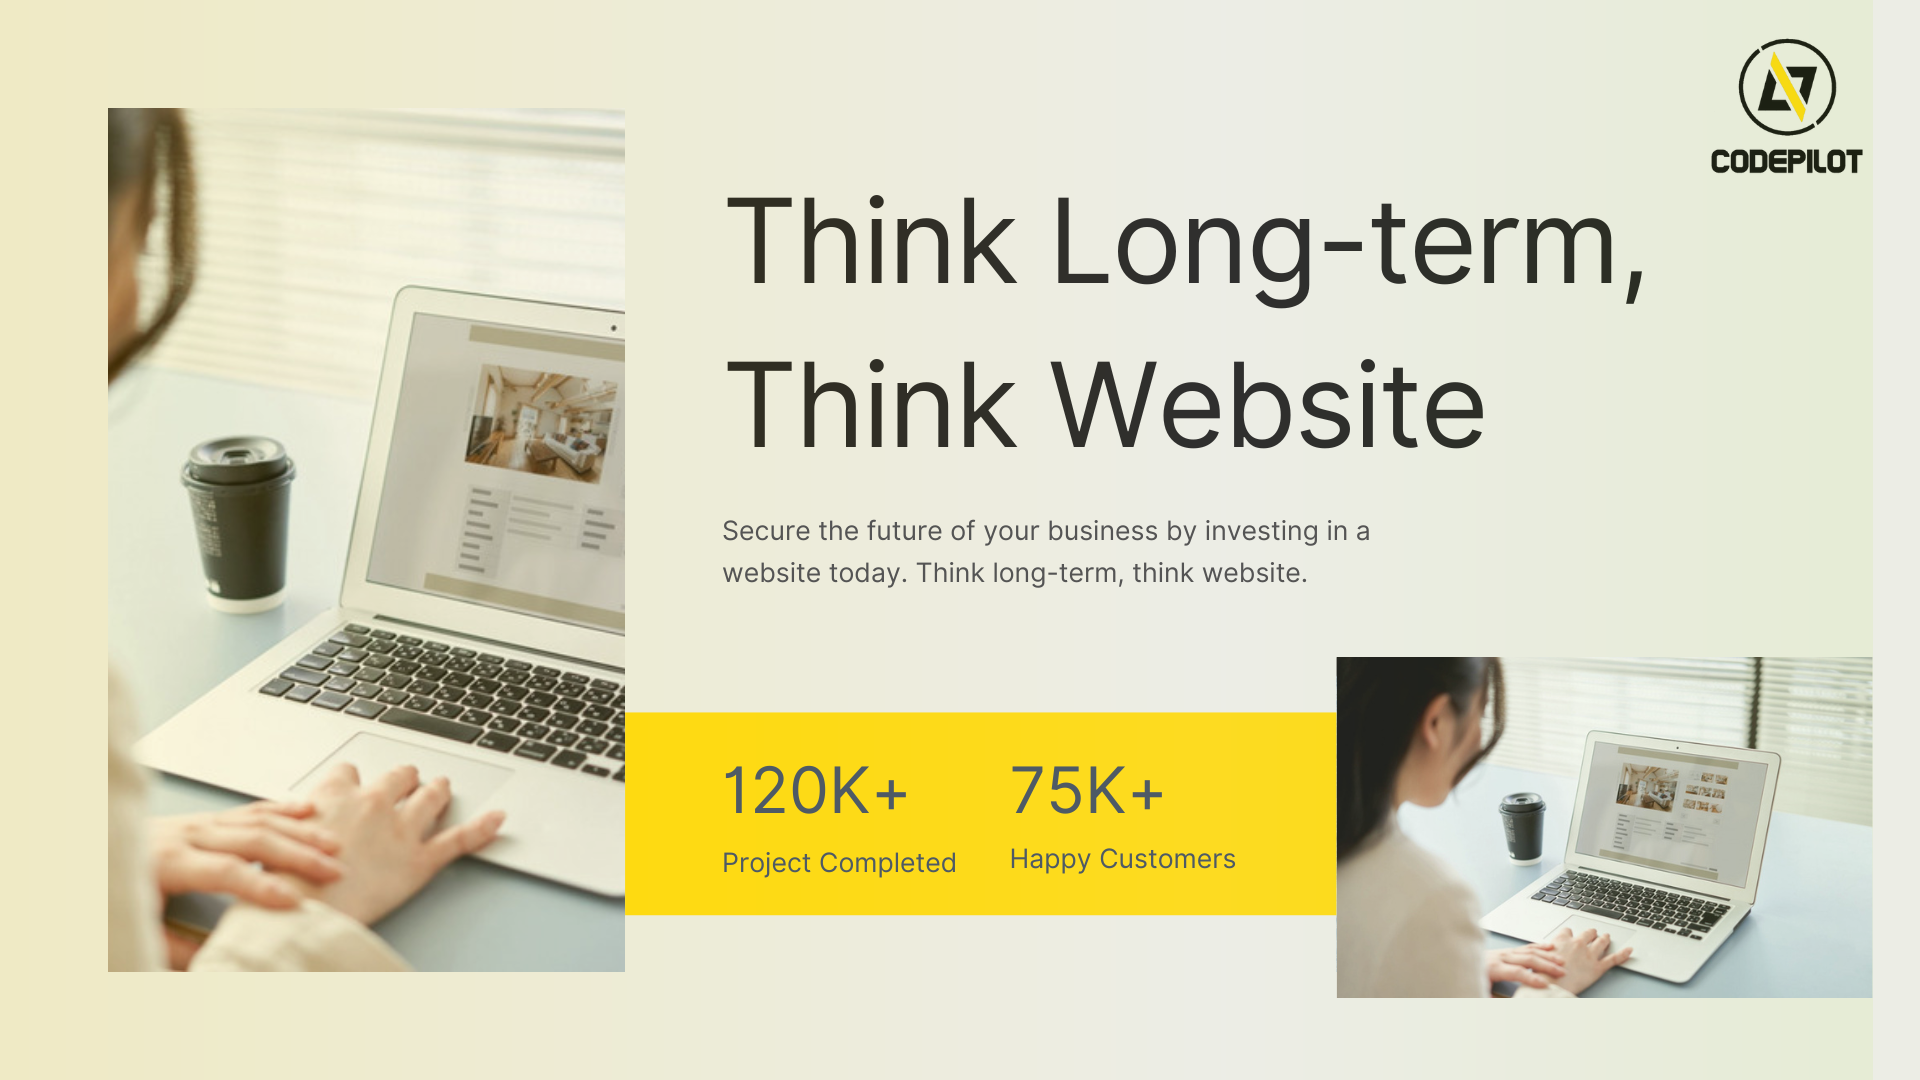 Think Long-term, Think Website